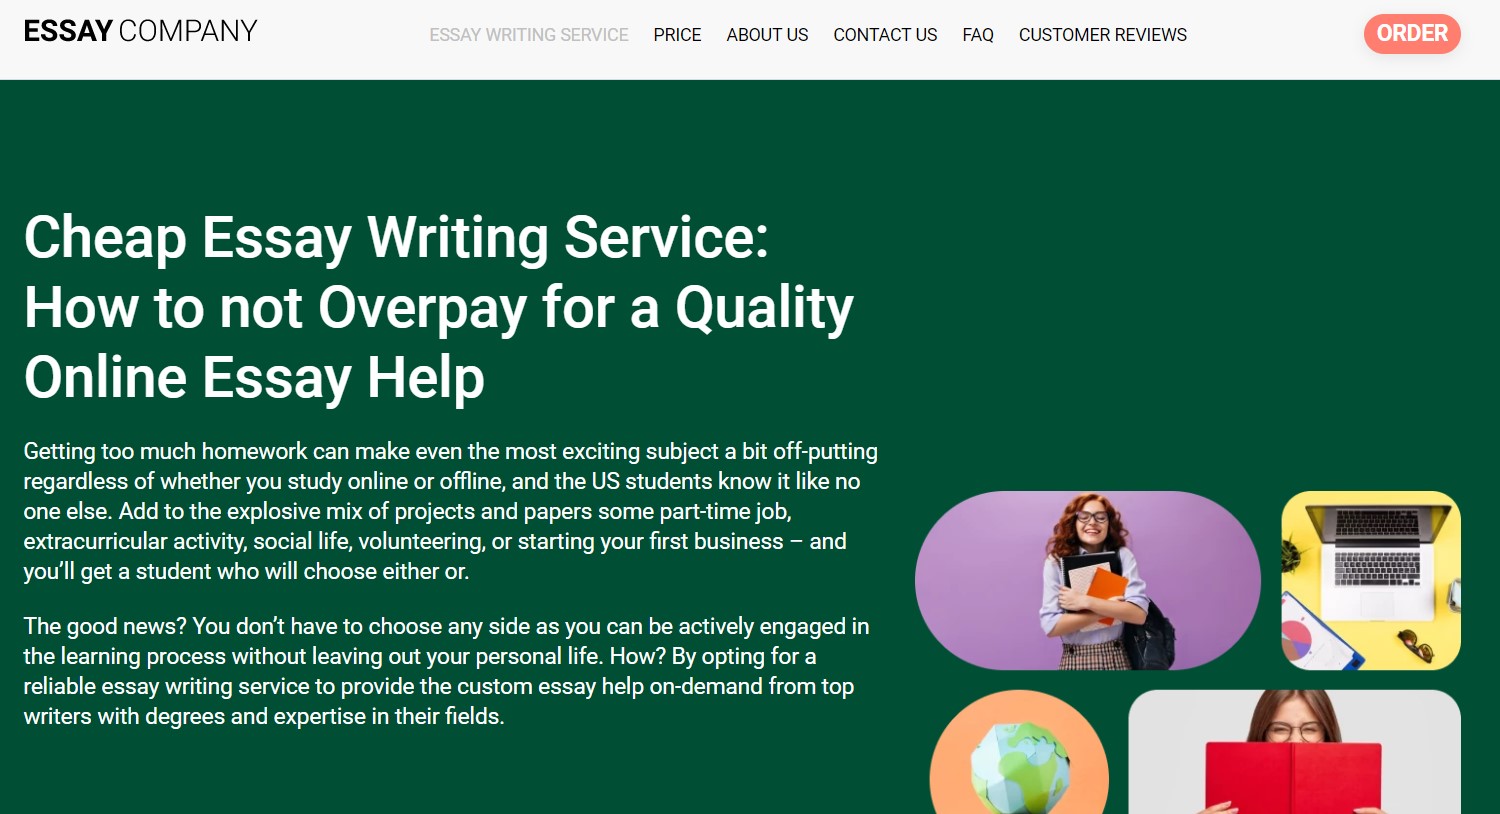 How To Start essay writing service With Less Than $110